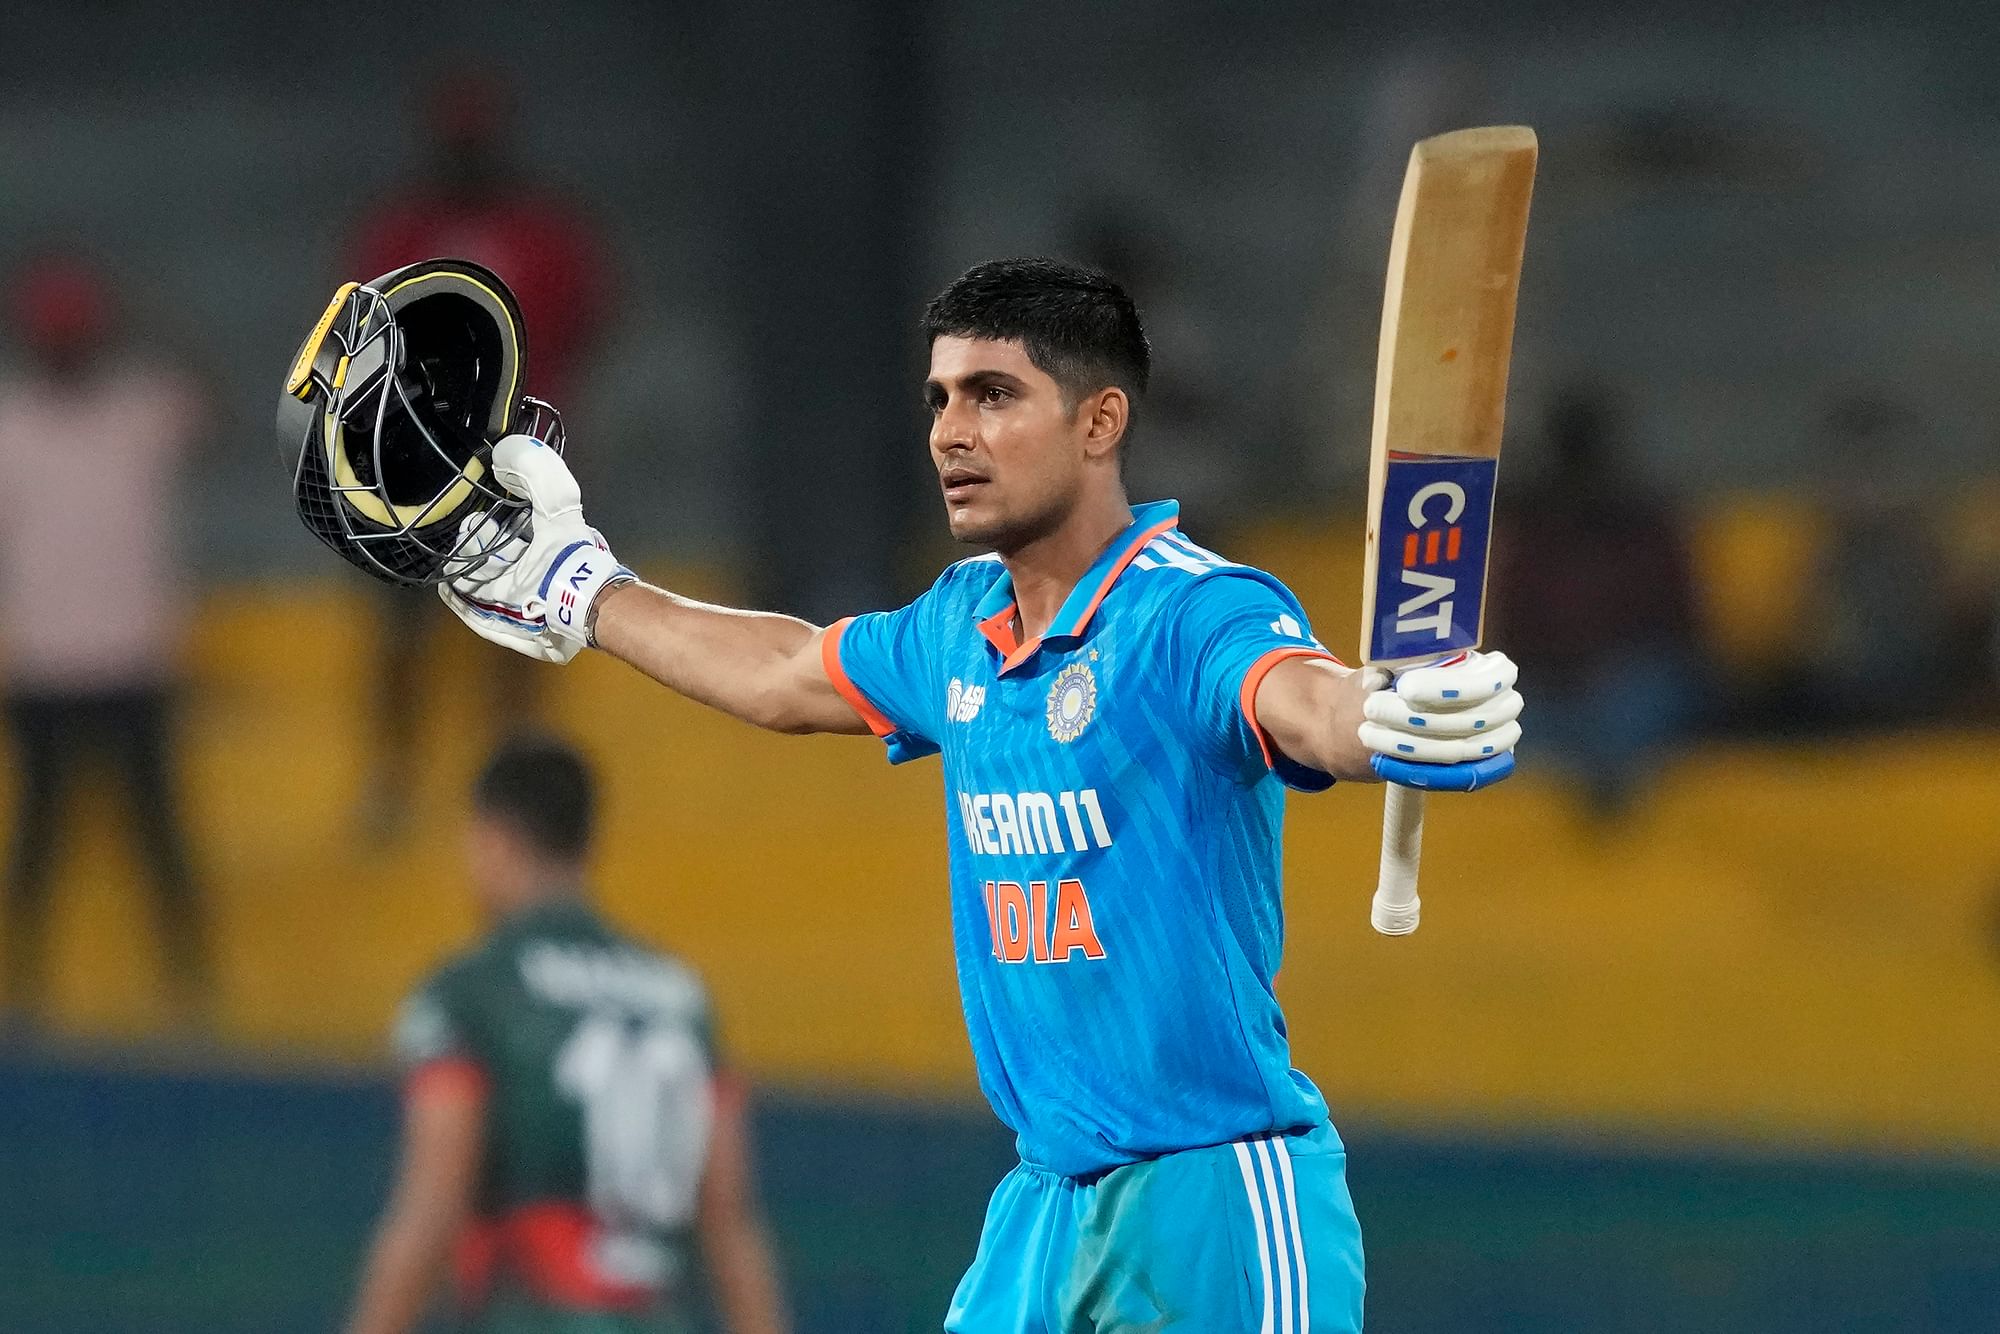 Despite Shubman Gill’s century, Bangladesh secured an exciting consolation victory